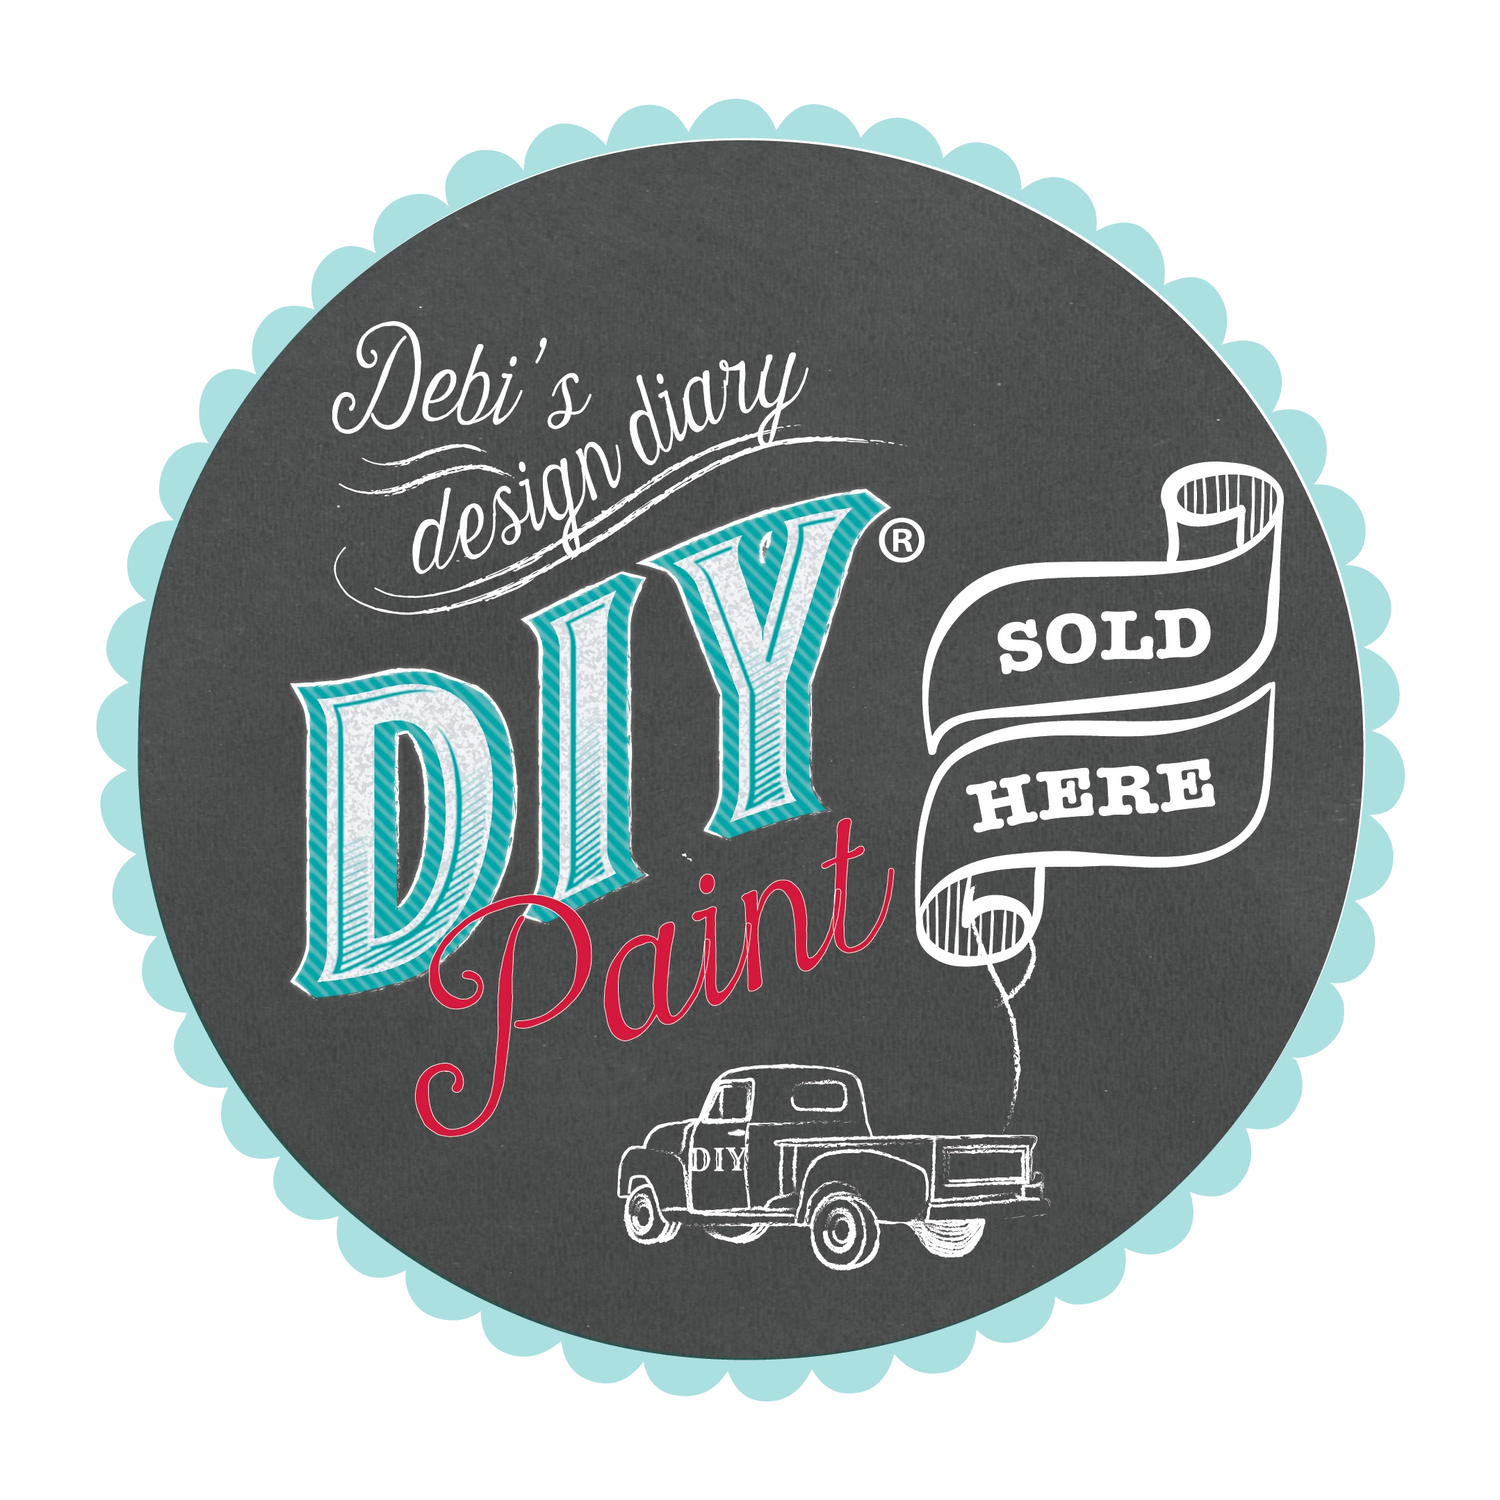 DIY Debi's Design Diary Paint Products